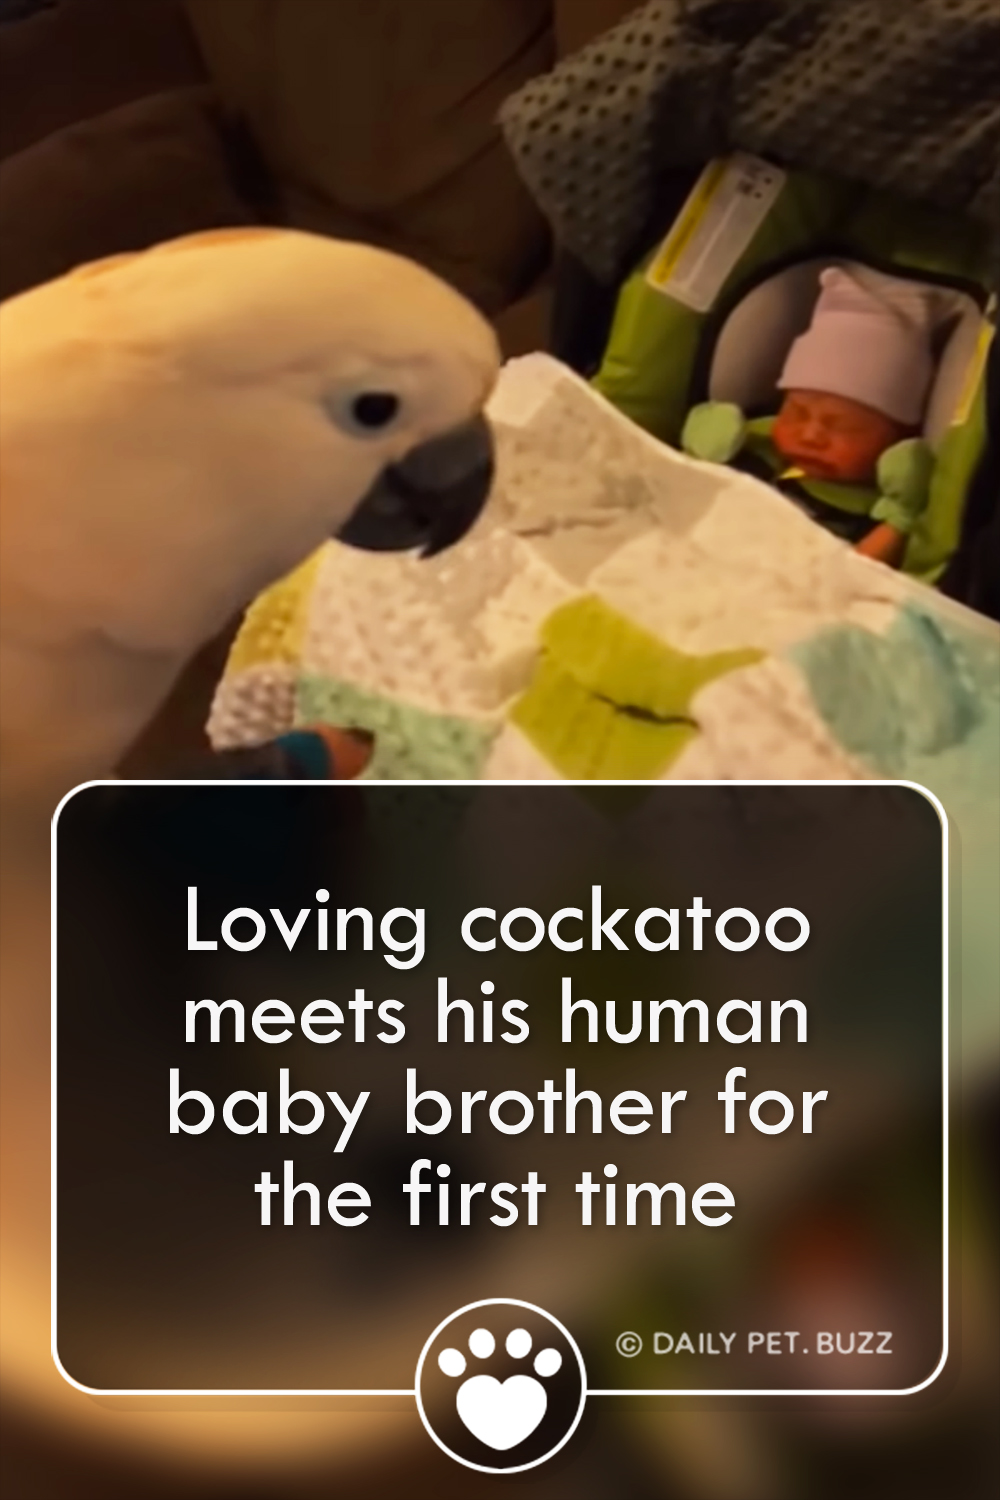 Loving cockatoo meets his human baby brother for the first time